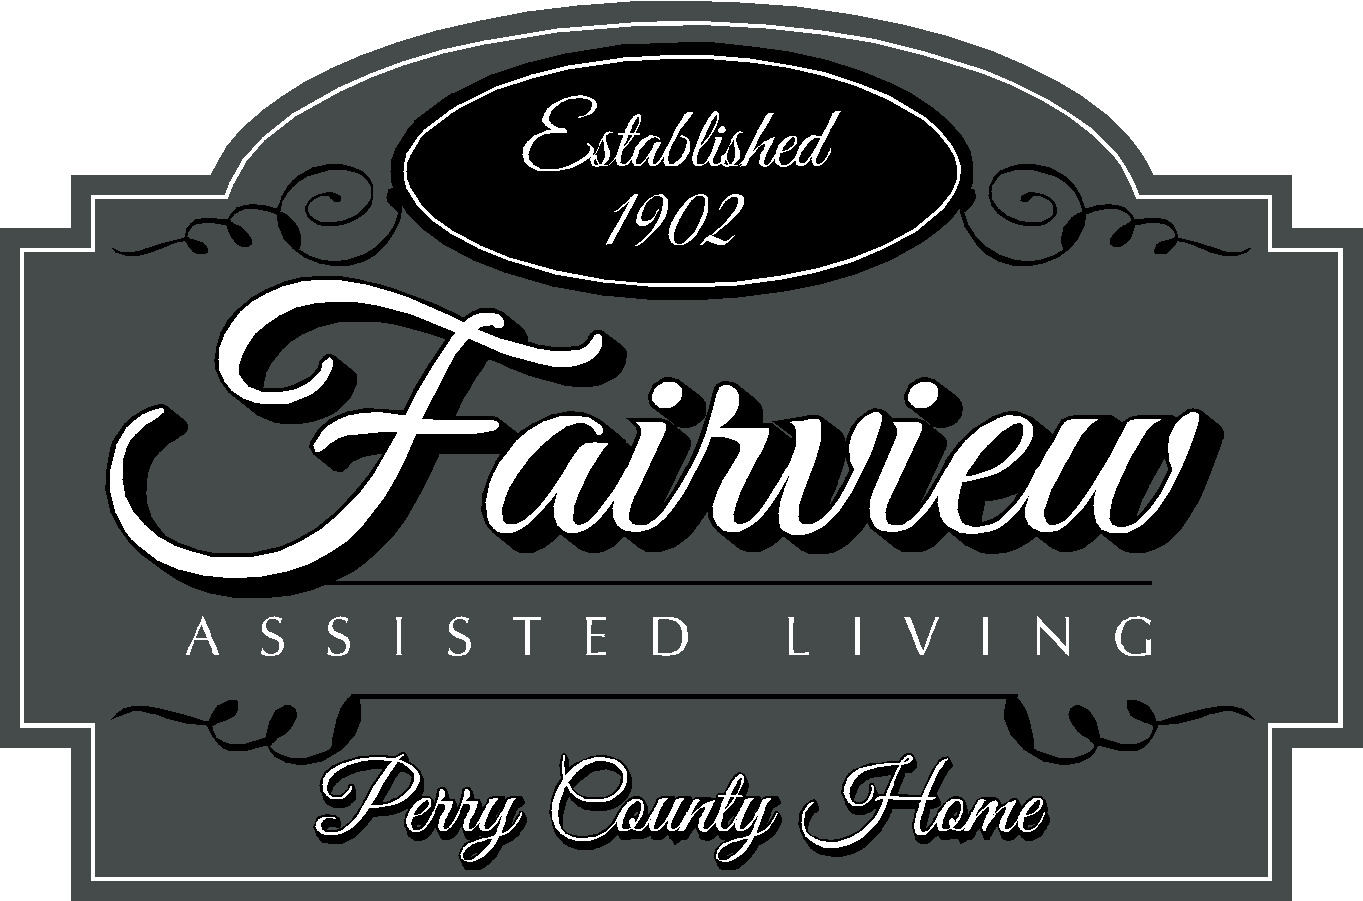 Fairview Assisted Living Featured in Ohio Magazine